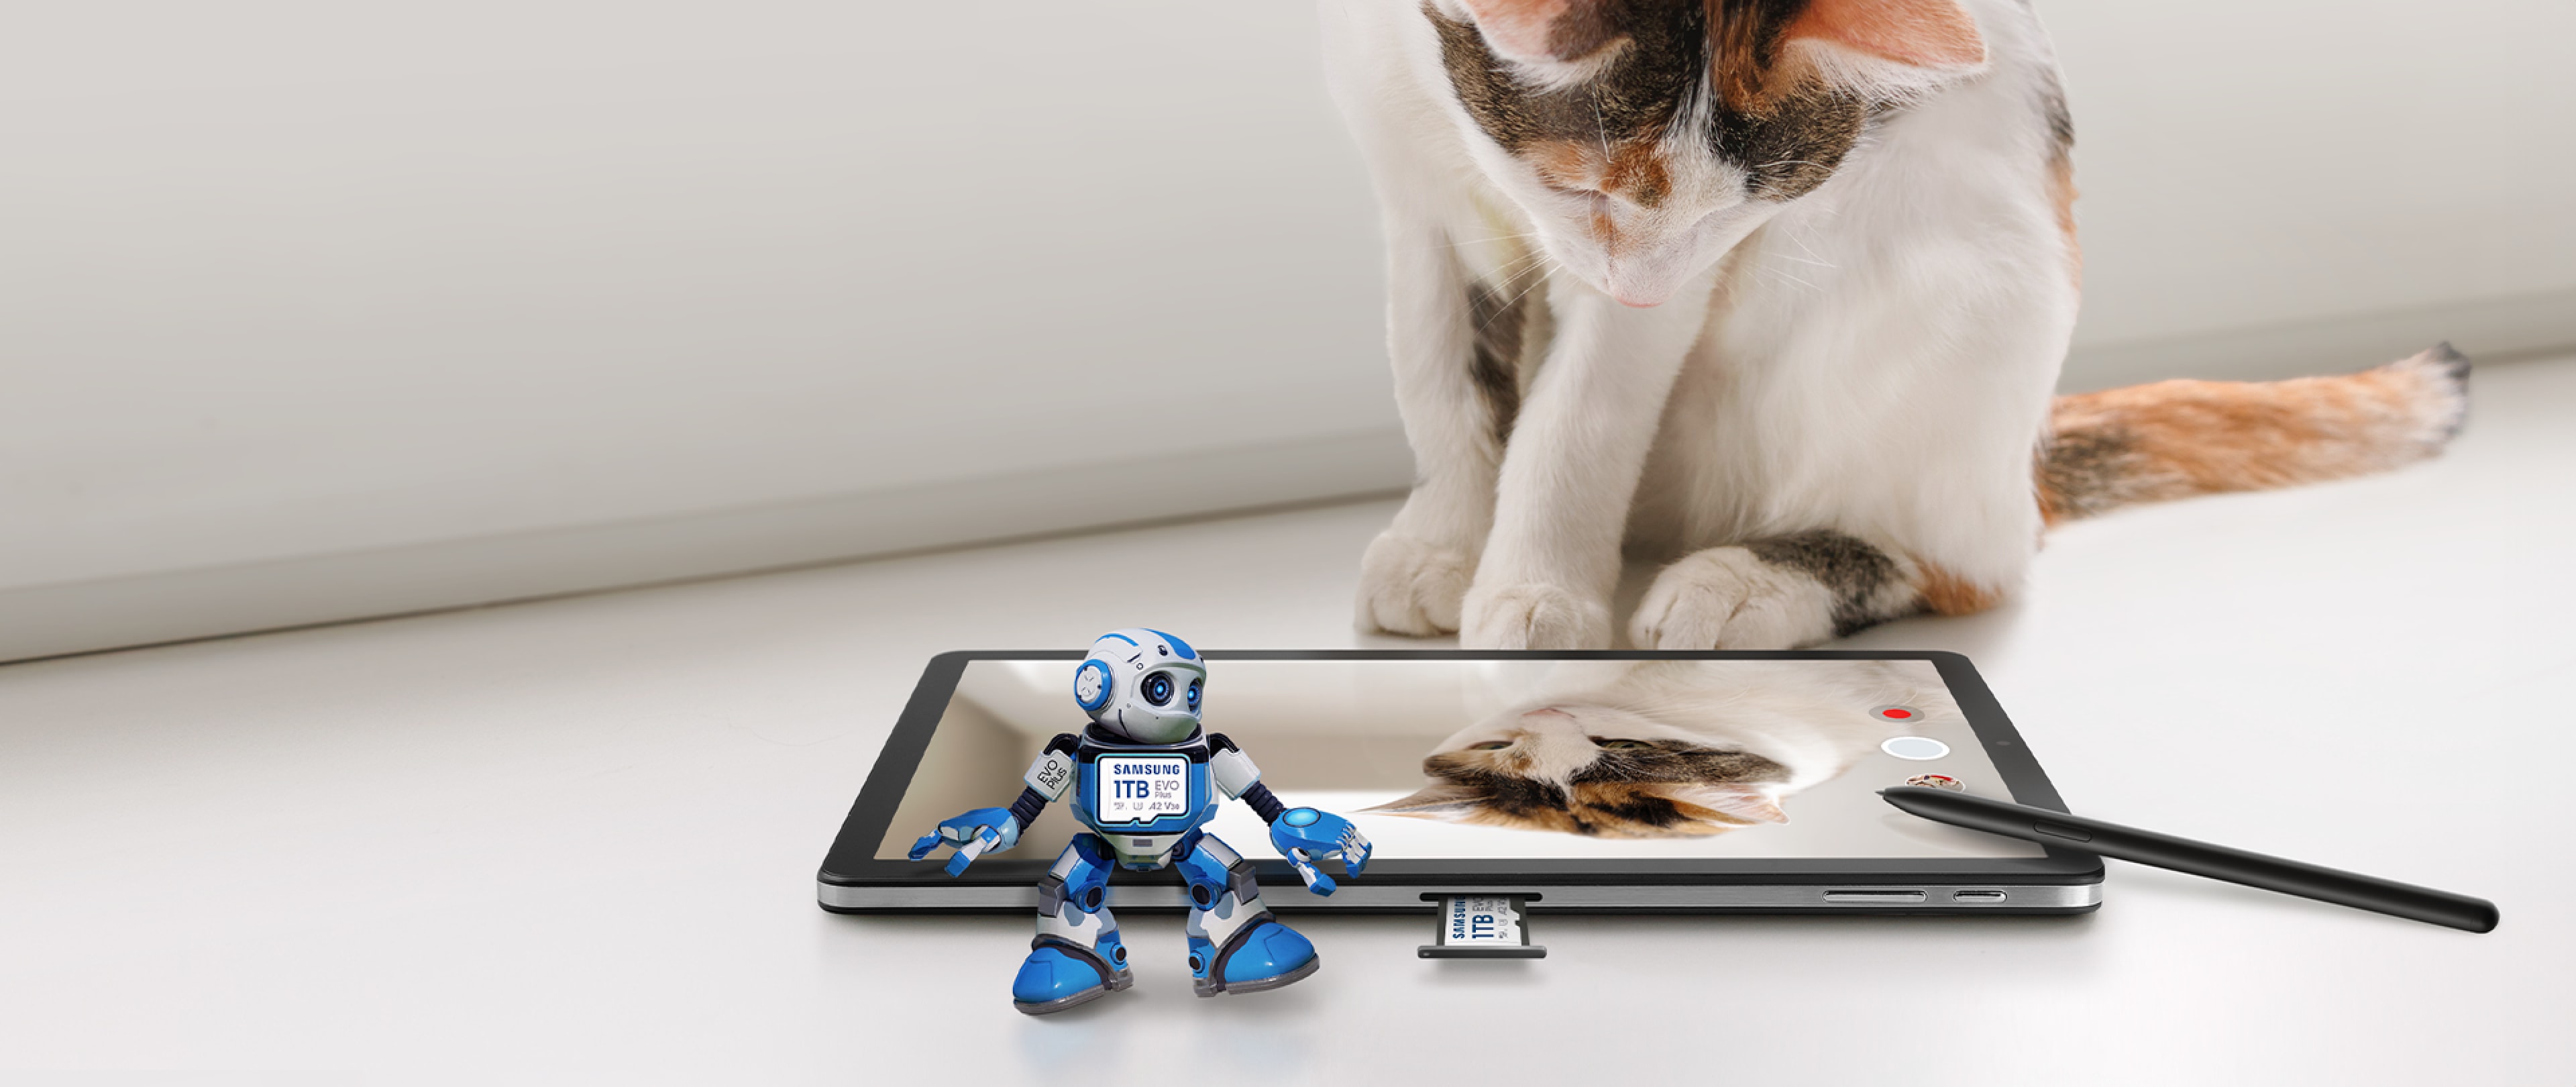 There are cats, tablets, and Samsung EVO Plus robot characters.